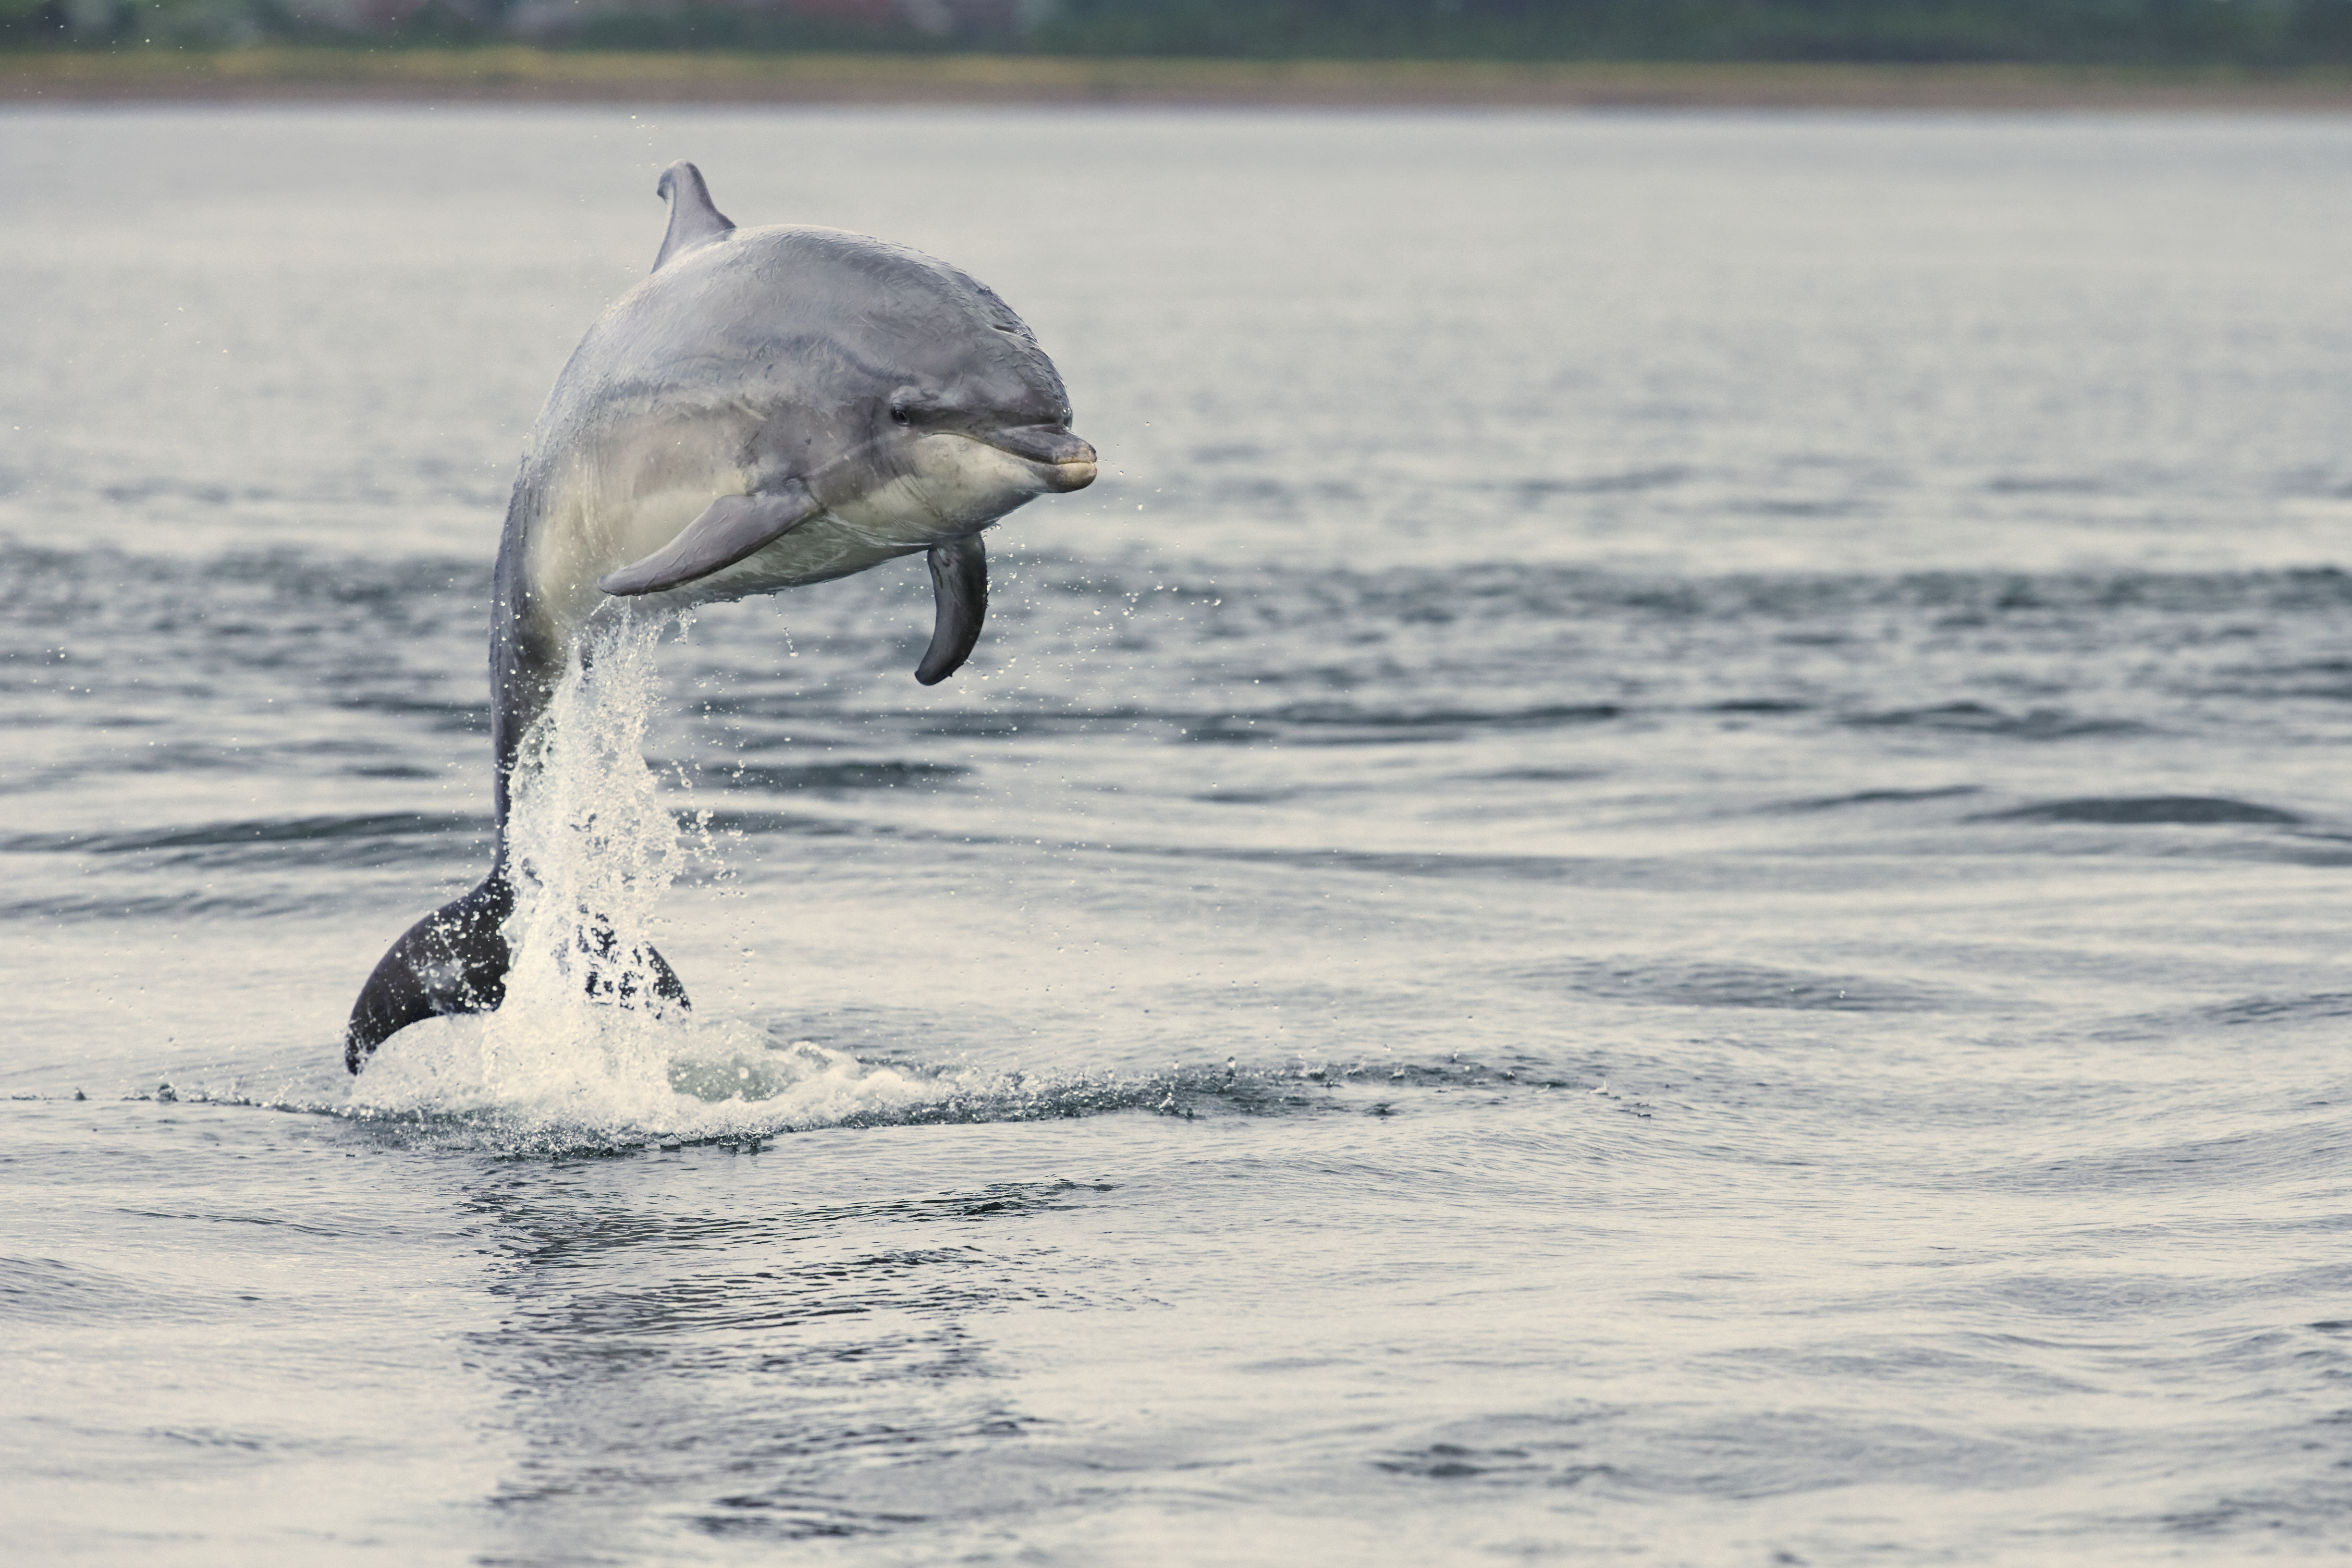 Bottle-nosed dolphins are a familiar sight around the north-east coast. (Picture: Chis O'Reilly/RSPB)